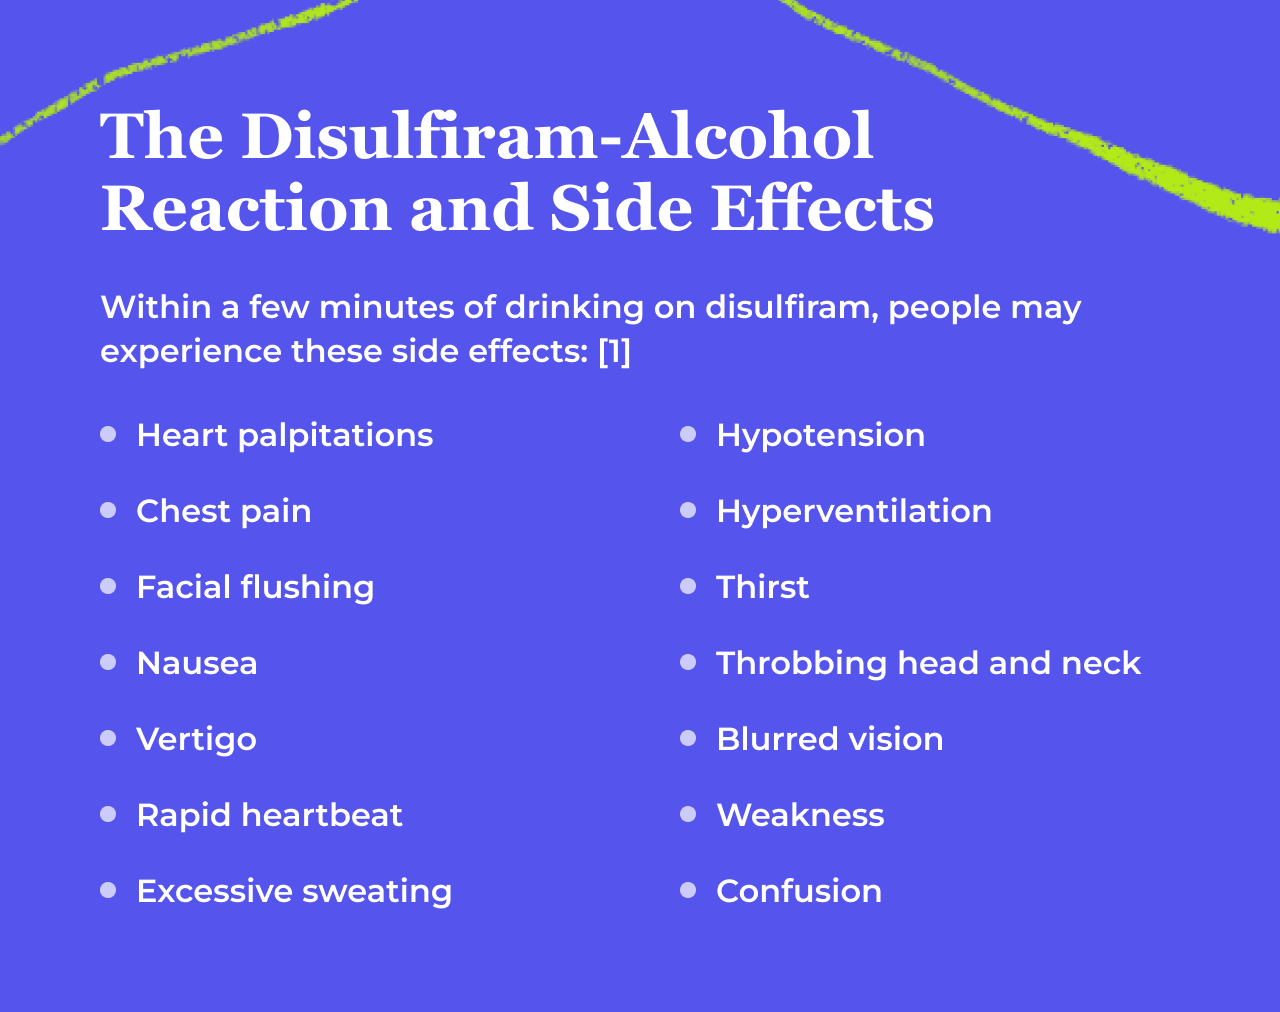 The disulfiram-alcohol reaction and side effects